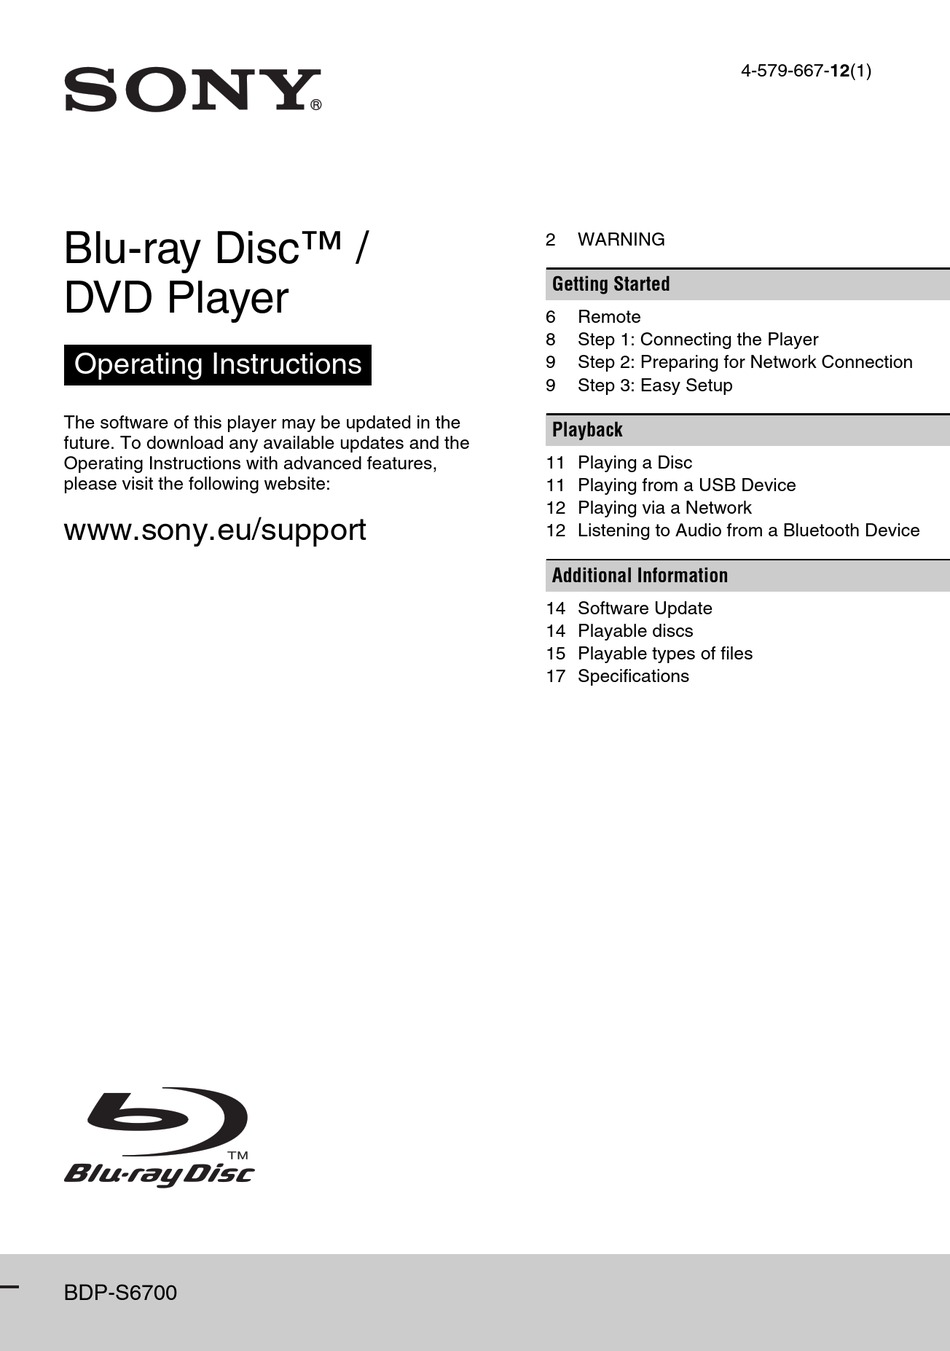 SONY BDP-S6700 OPERATING INSTRUCTIONS MANUAL Pdf Download | ManualsLib